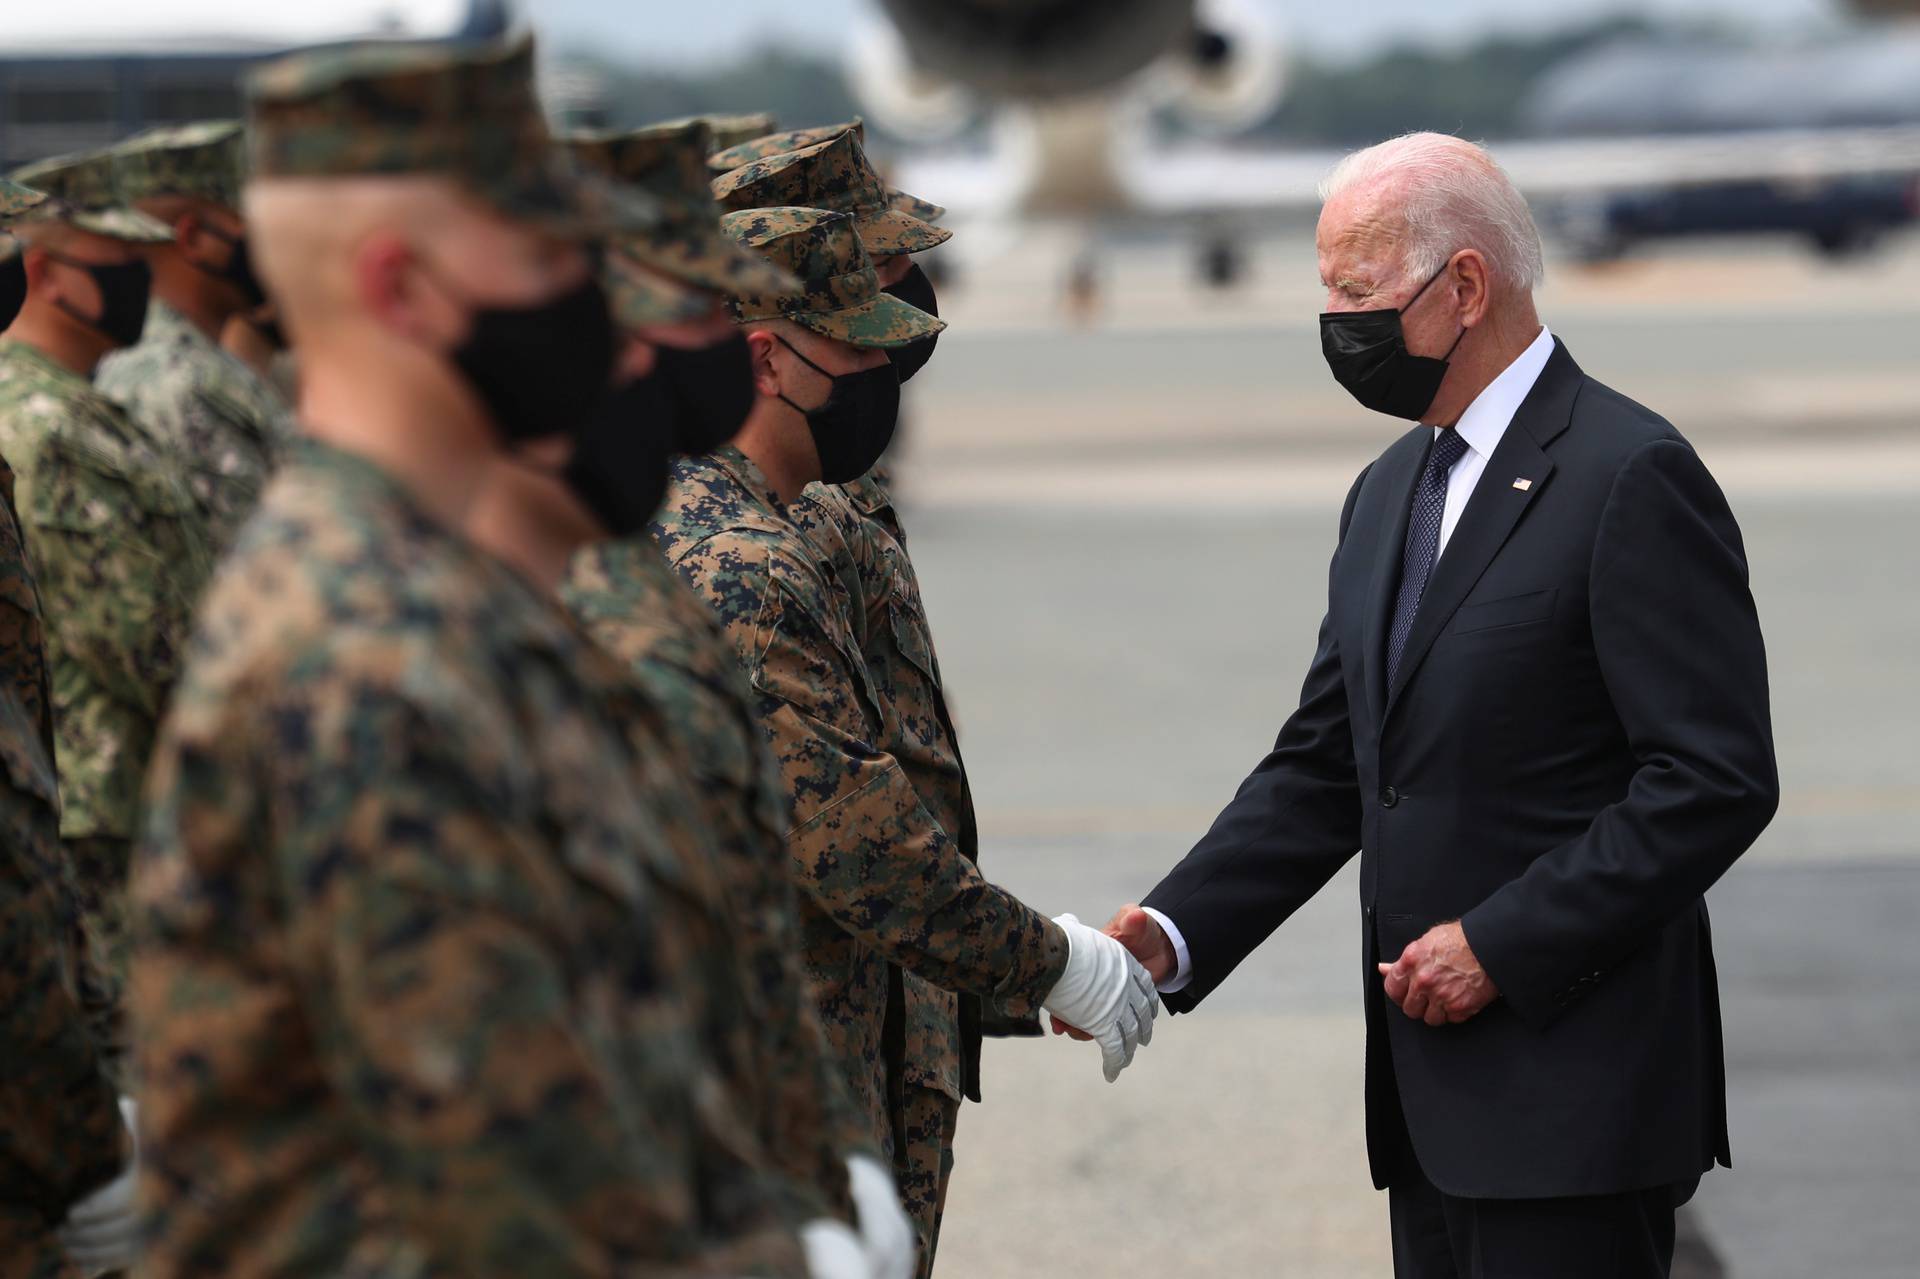 U.S. President Joe Biden hands challenge coins to the members of the U.S. Marine Corps Honor Guard before boarding Air Force One